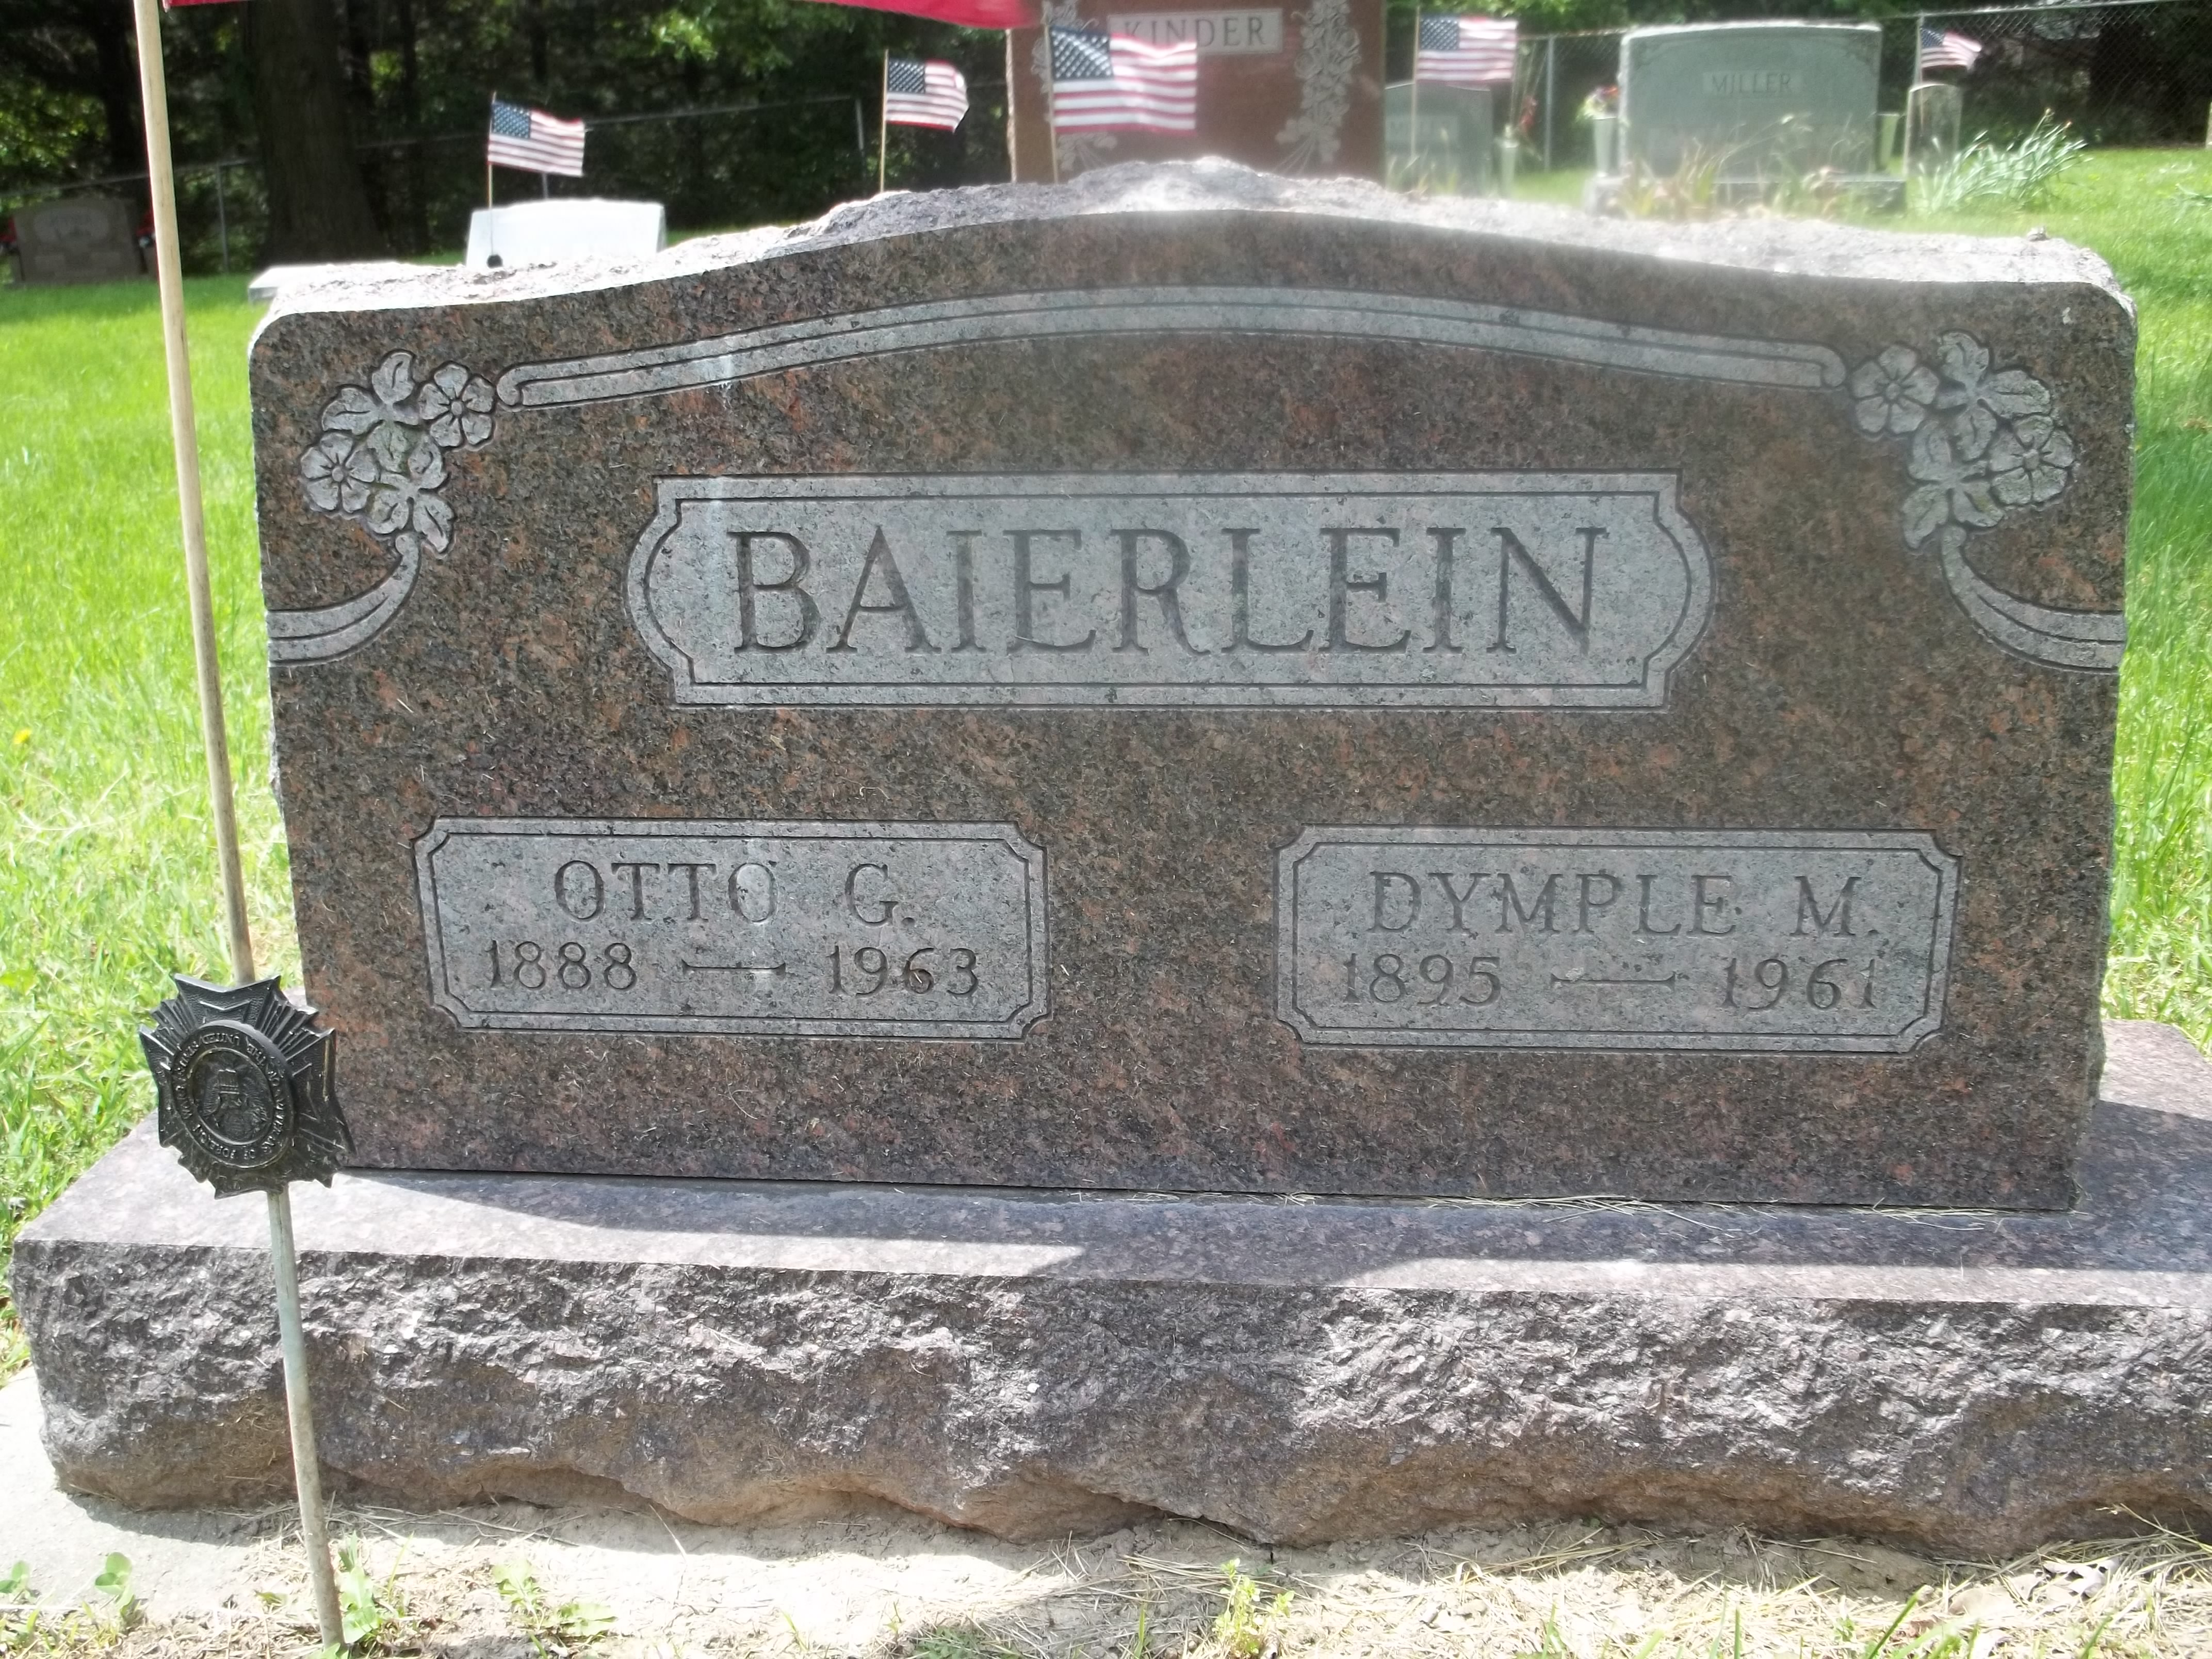 Otto G. and Dymple M. Baierlein Headstone